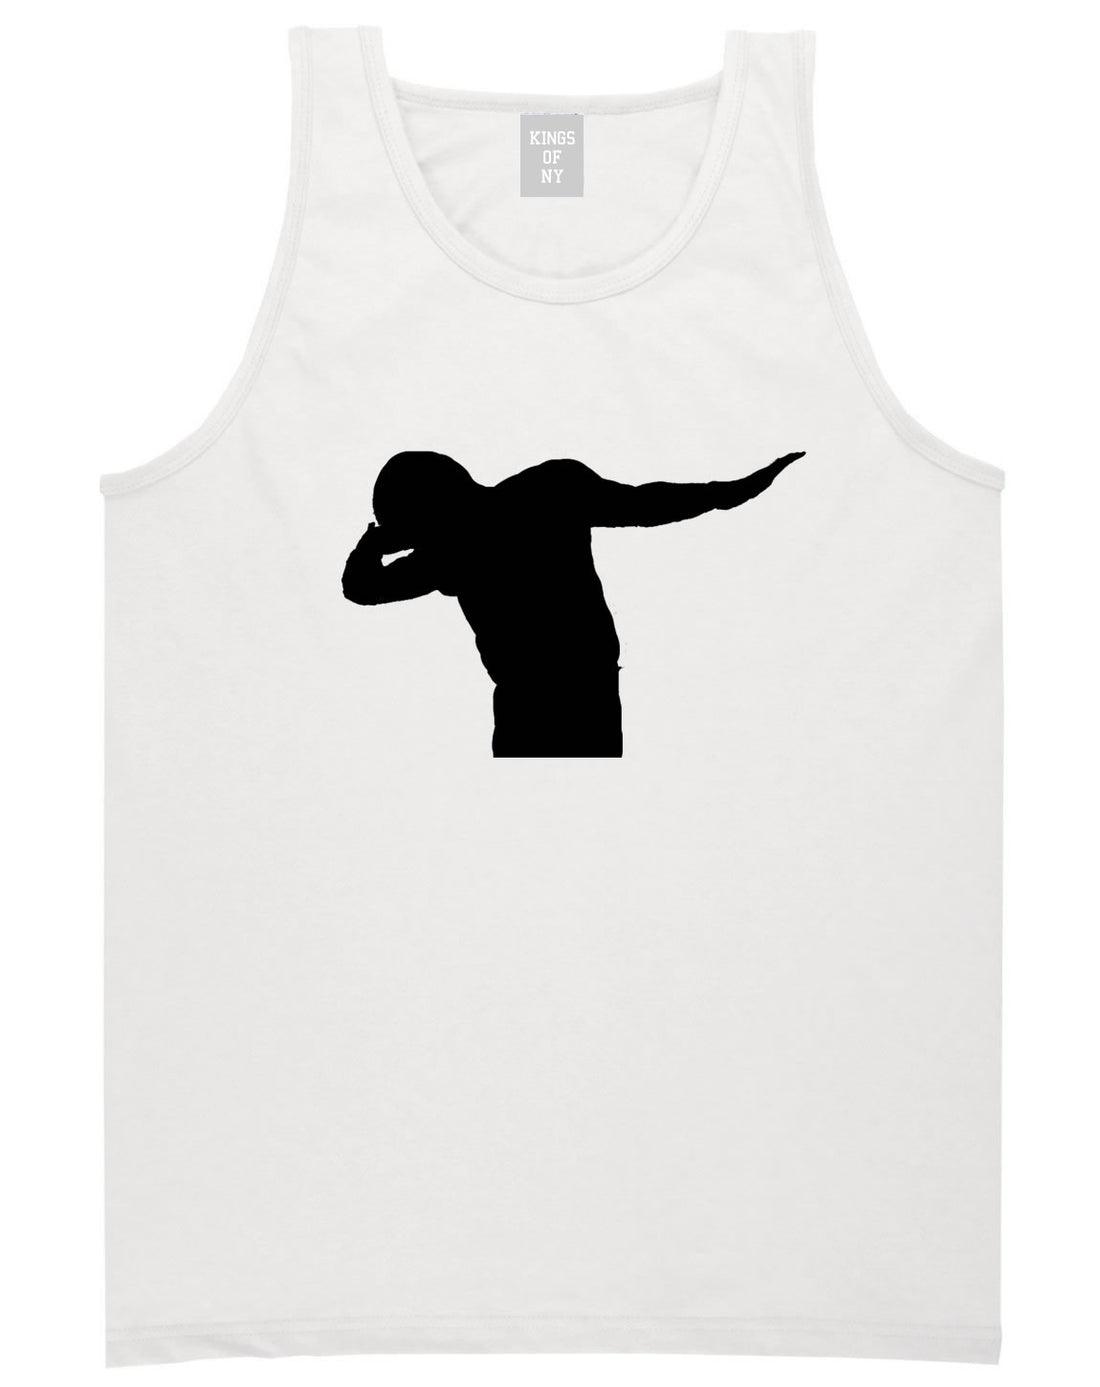 Dab On Em Football Tank Top by Kings Of NY